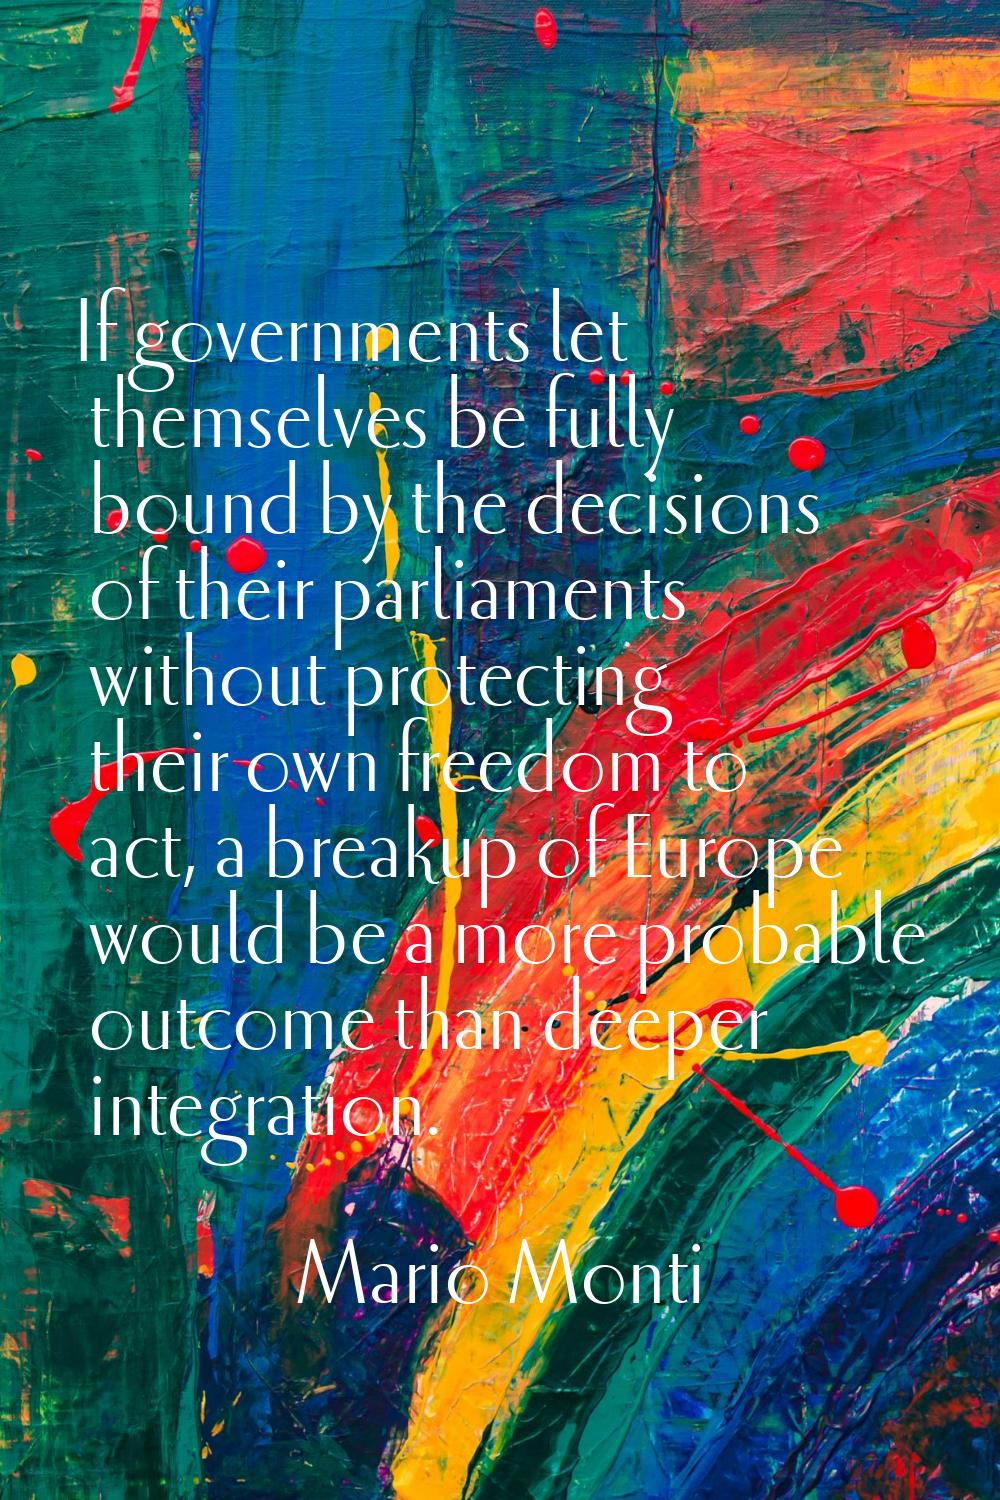 If governments let themselves be fully bound by the decisions of their parliaments without protecti